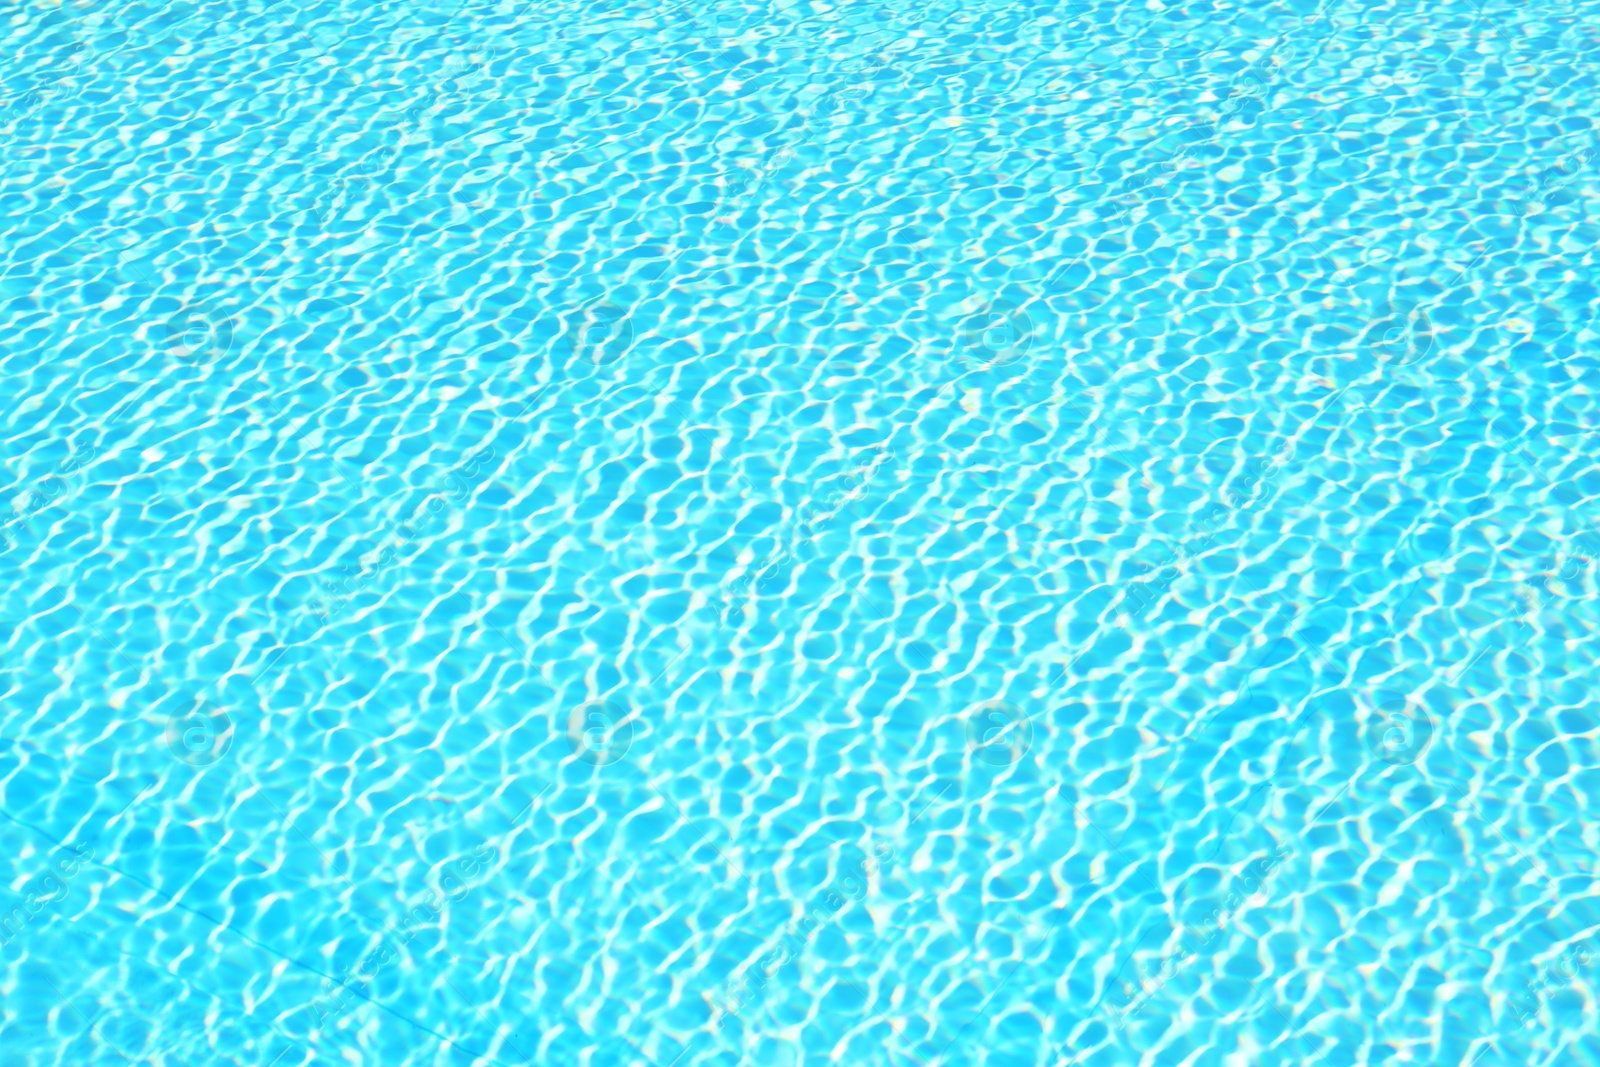 Photo of Swimming pool with clear water as background